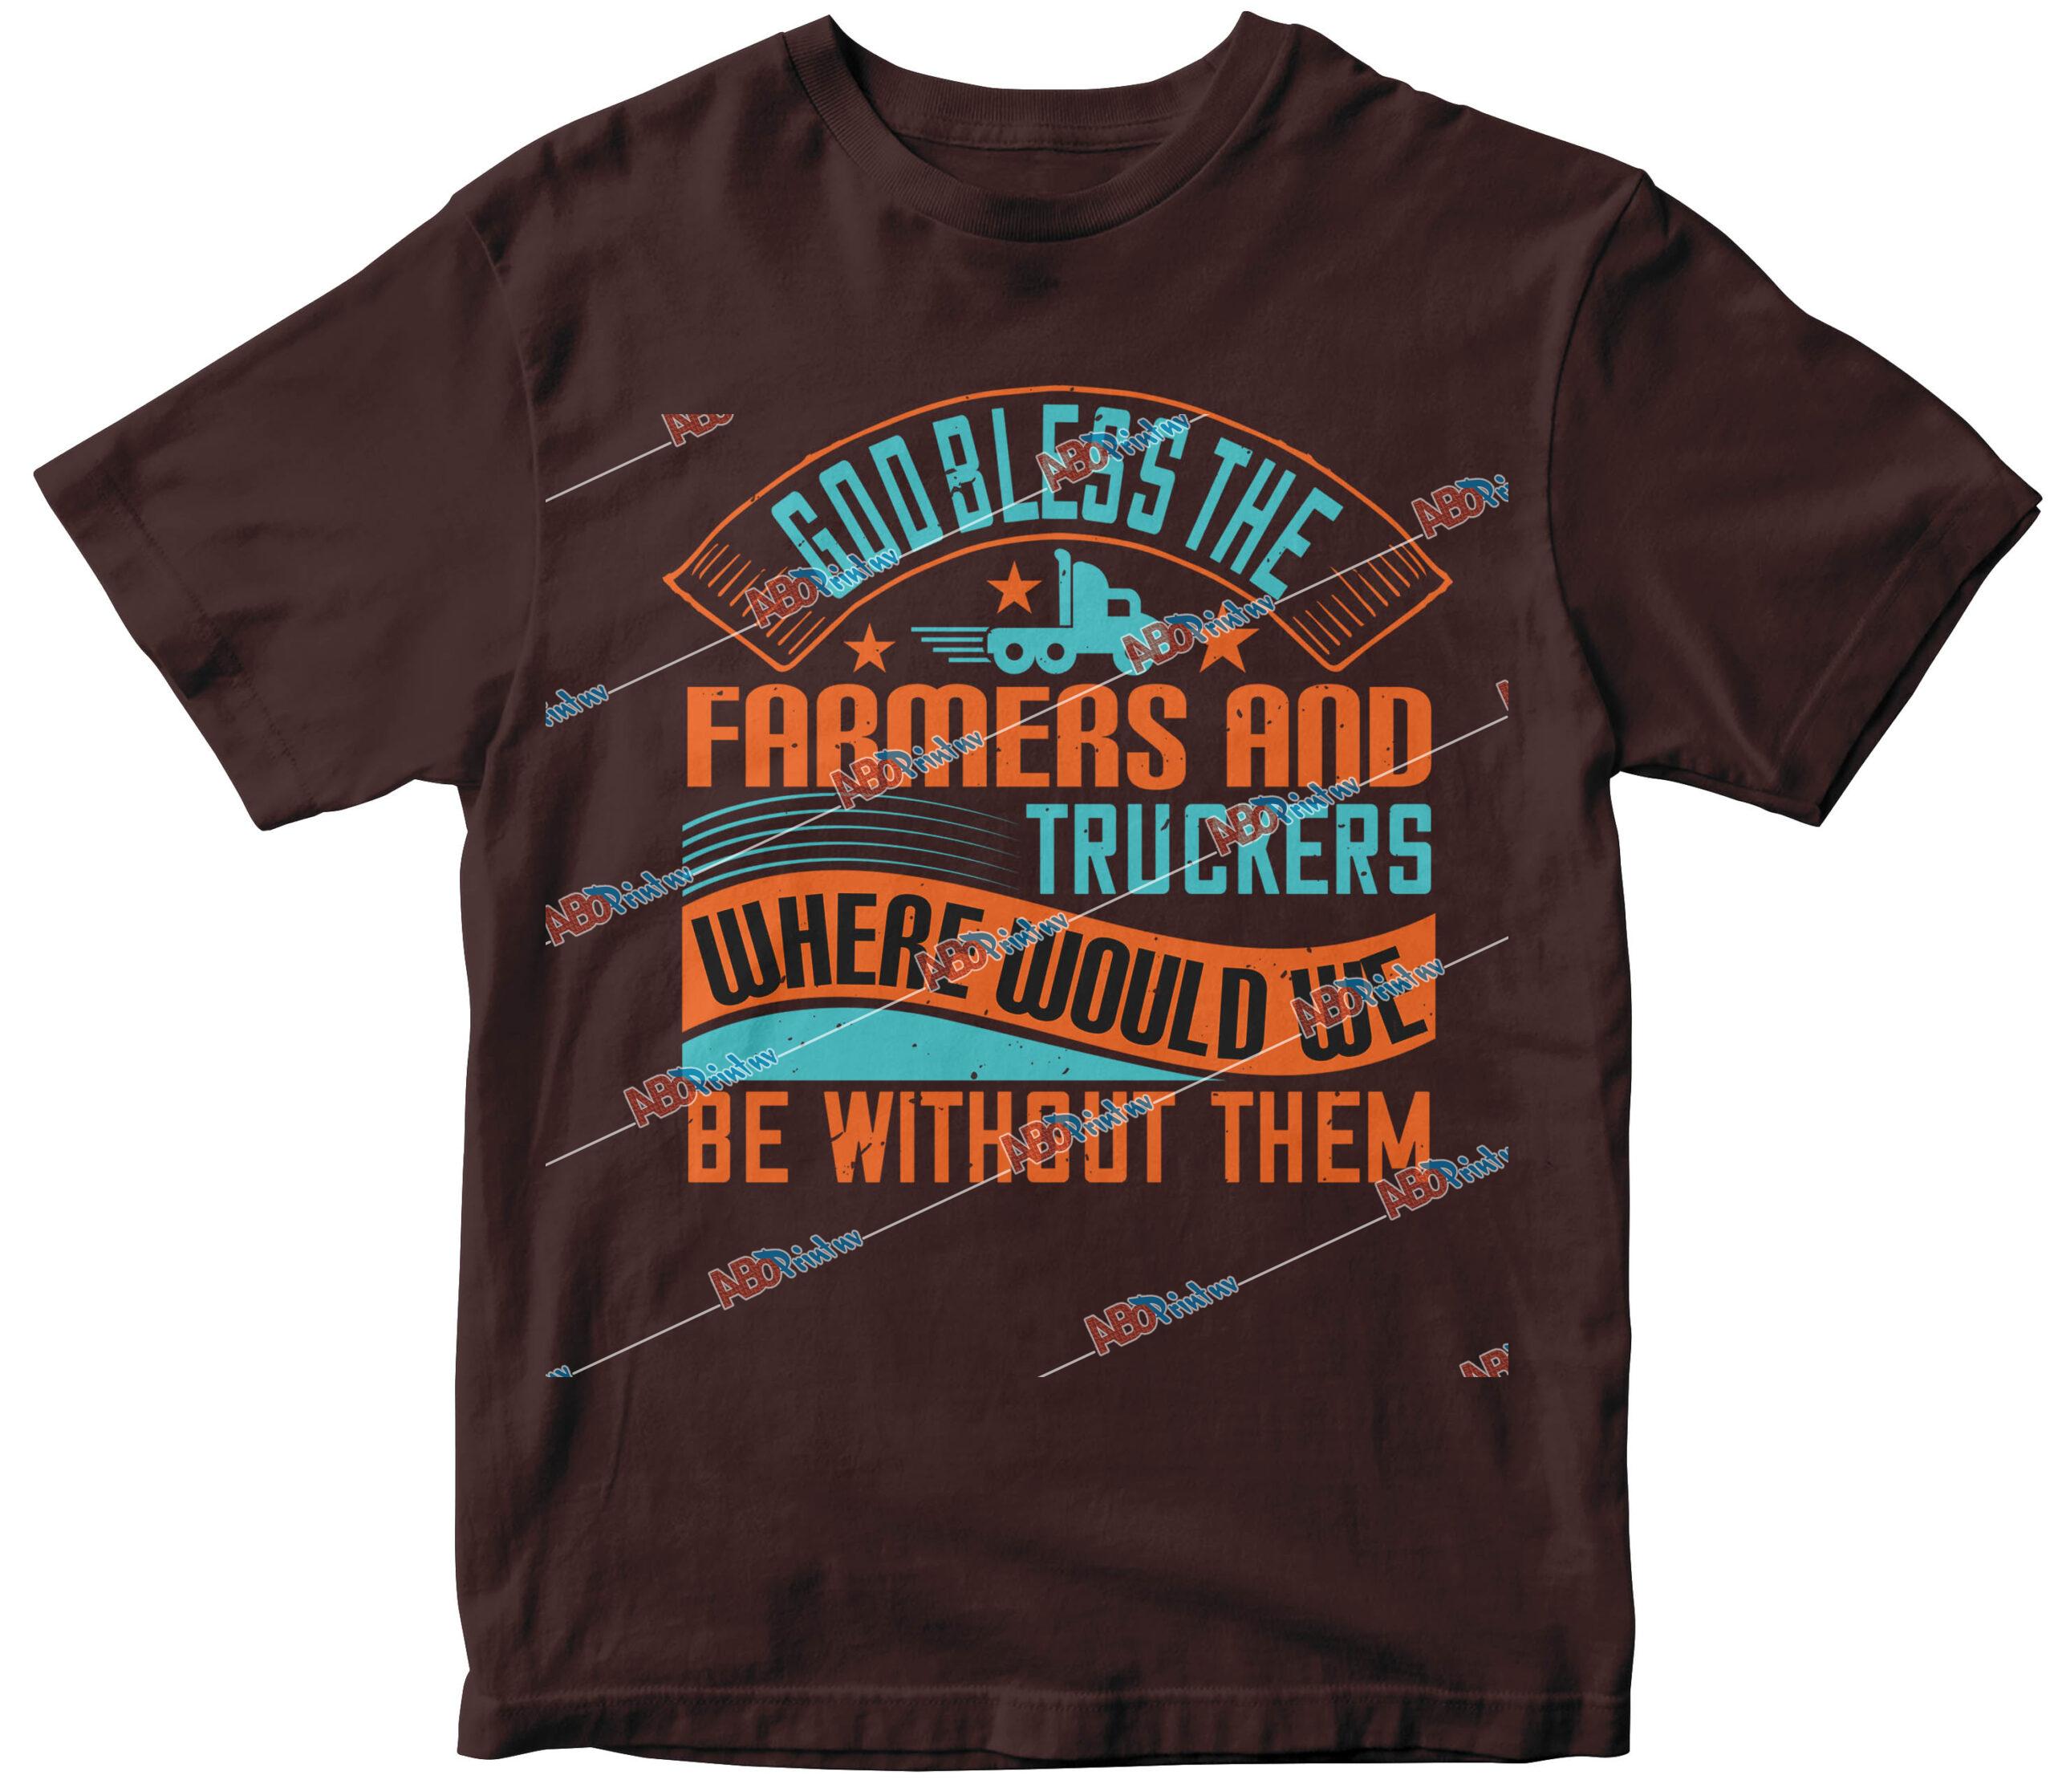 God bless the farmers and truckers (1).jpg